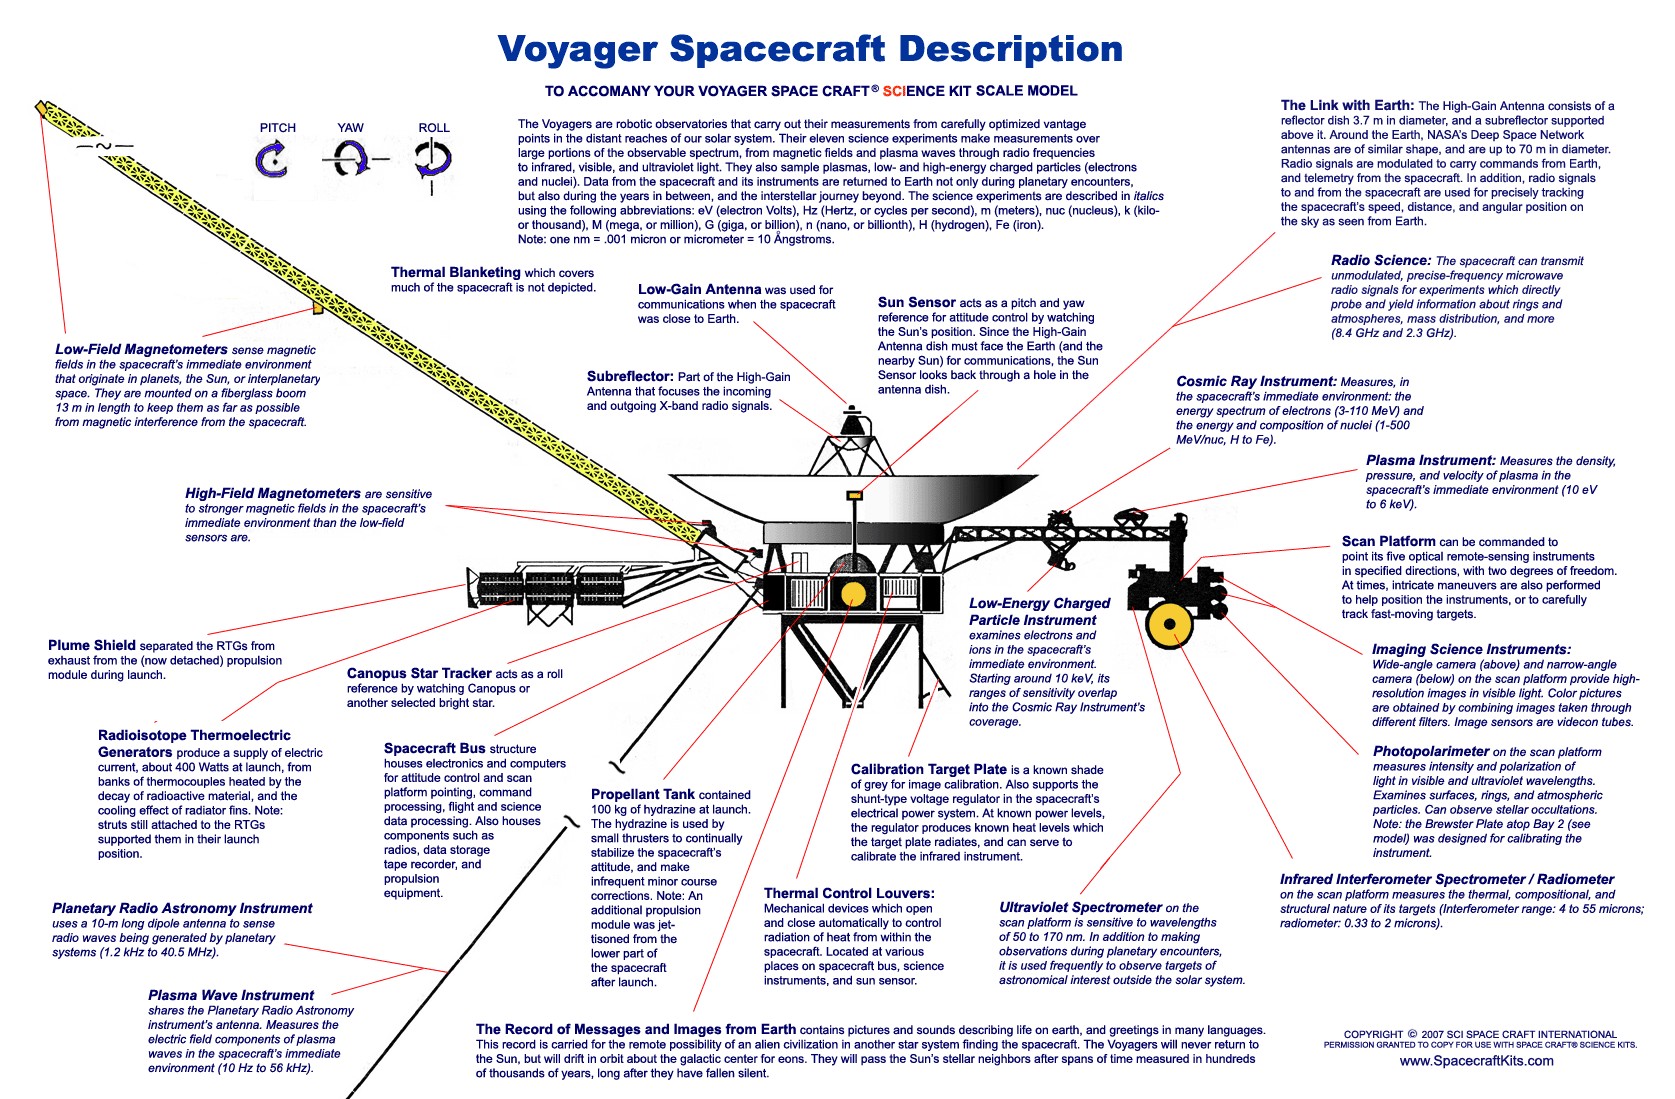 The Illustrated Voyager Spacecraft